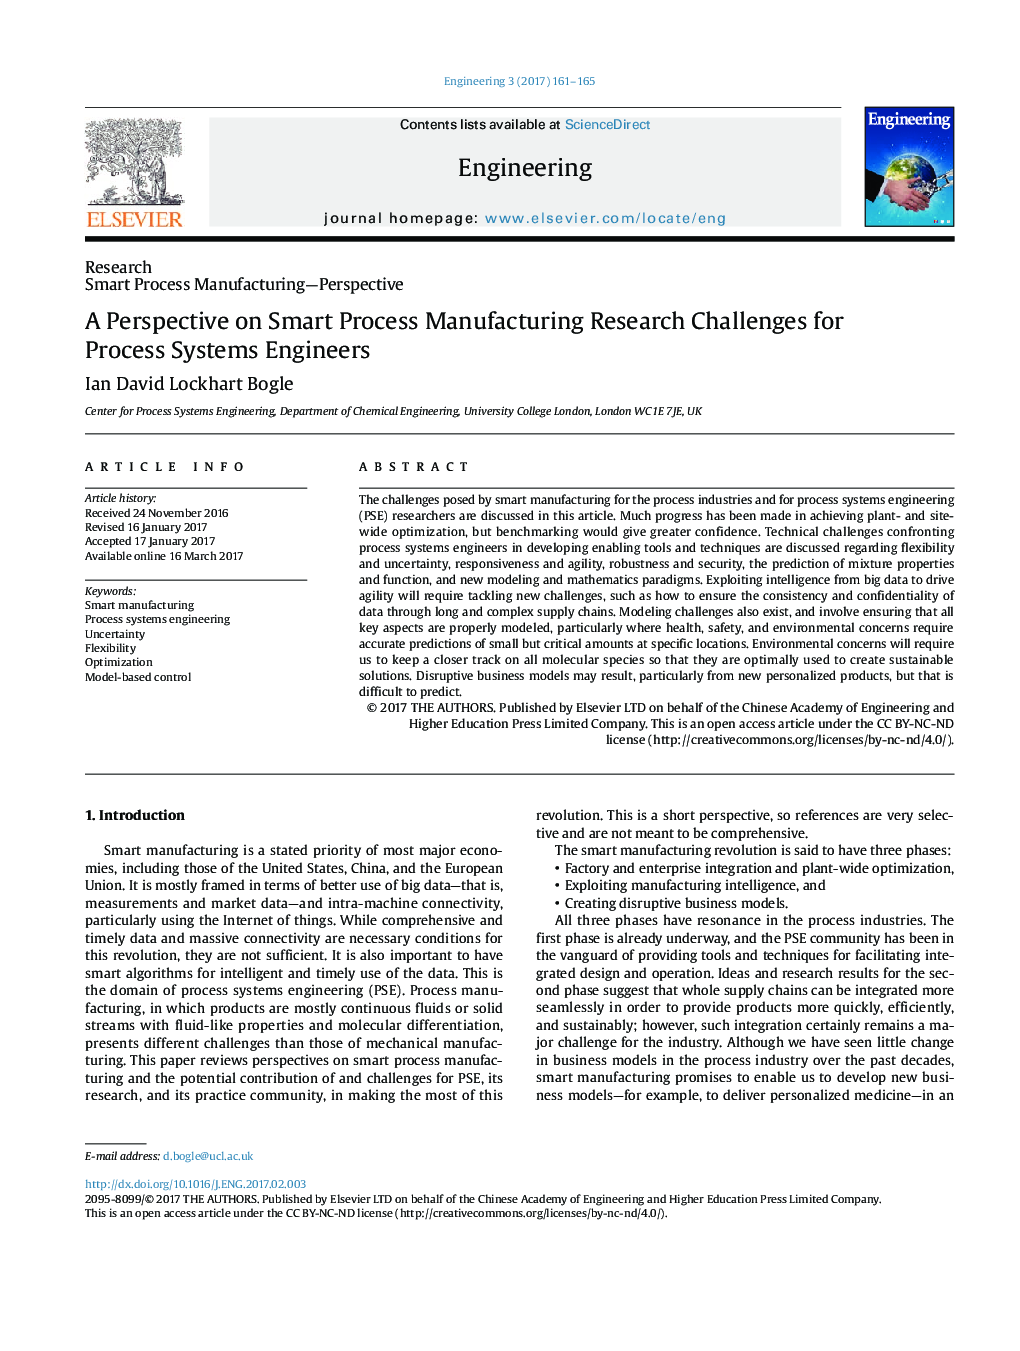 A Perspective on Smart Process Manufacturing Research Challenges for Process Systems Engineers